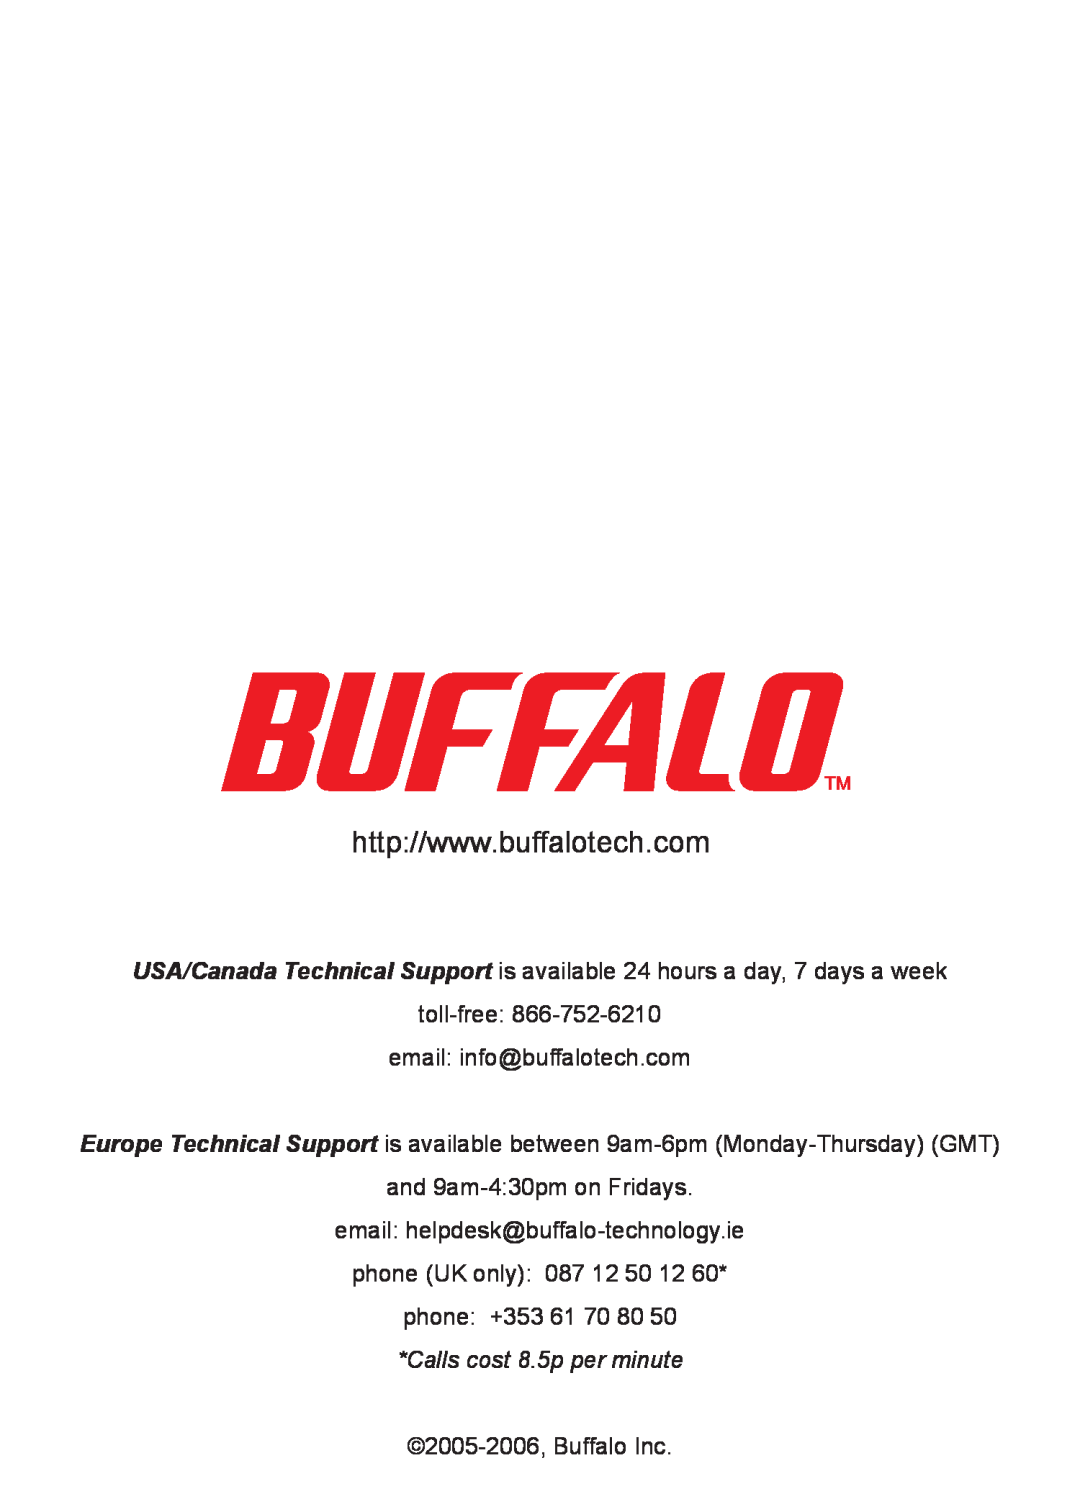 Buffalo Technology v1.1 manual toll-free email info@buffalotech.com, and 9am-430pm on Fridays, Calls cost 8.5p per minute 